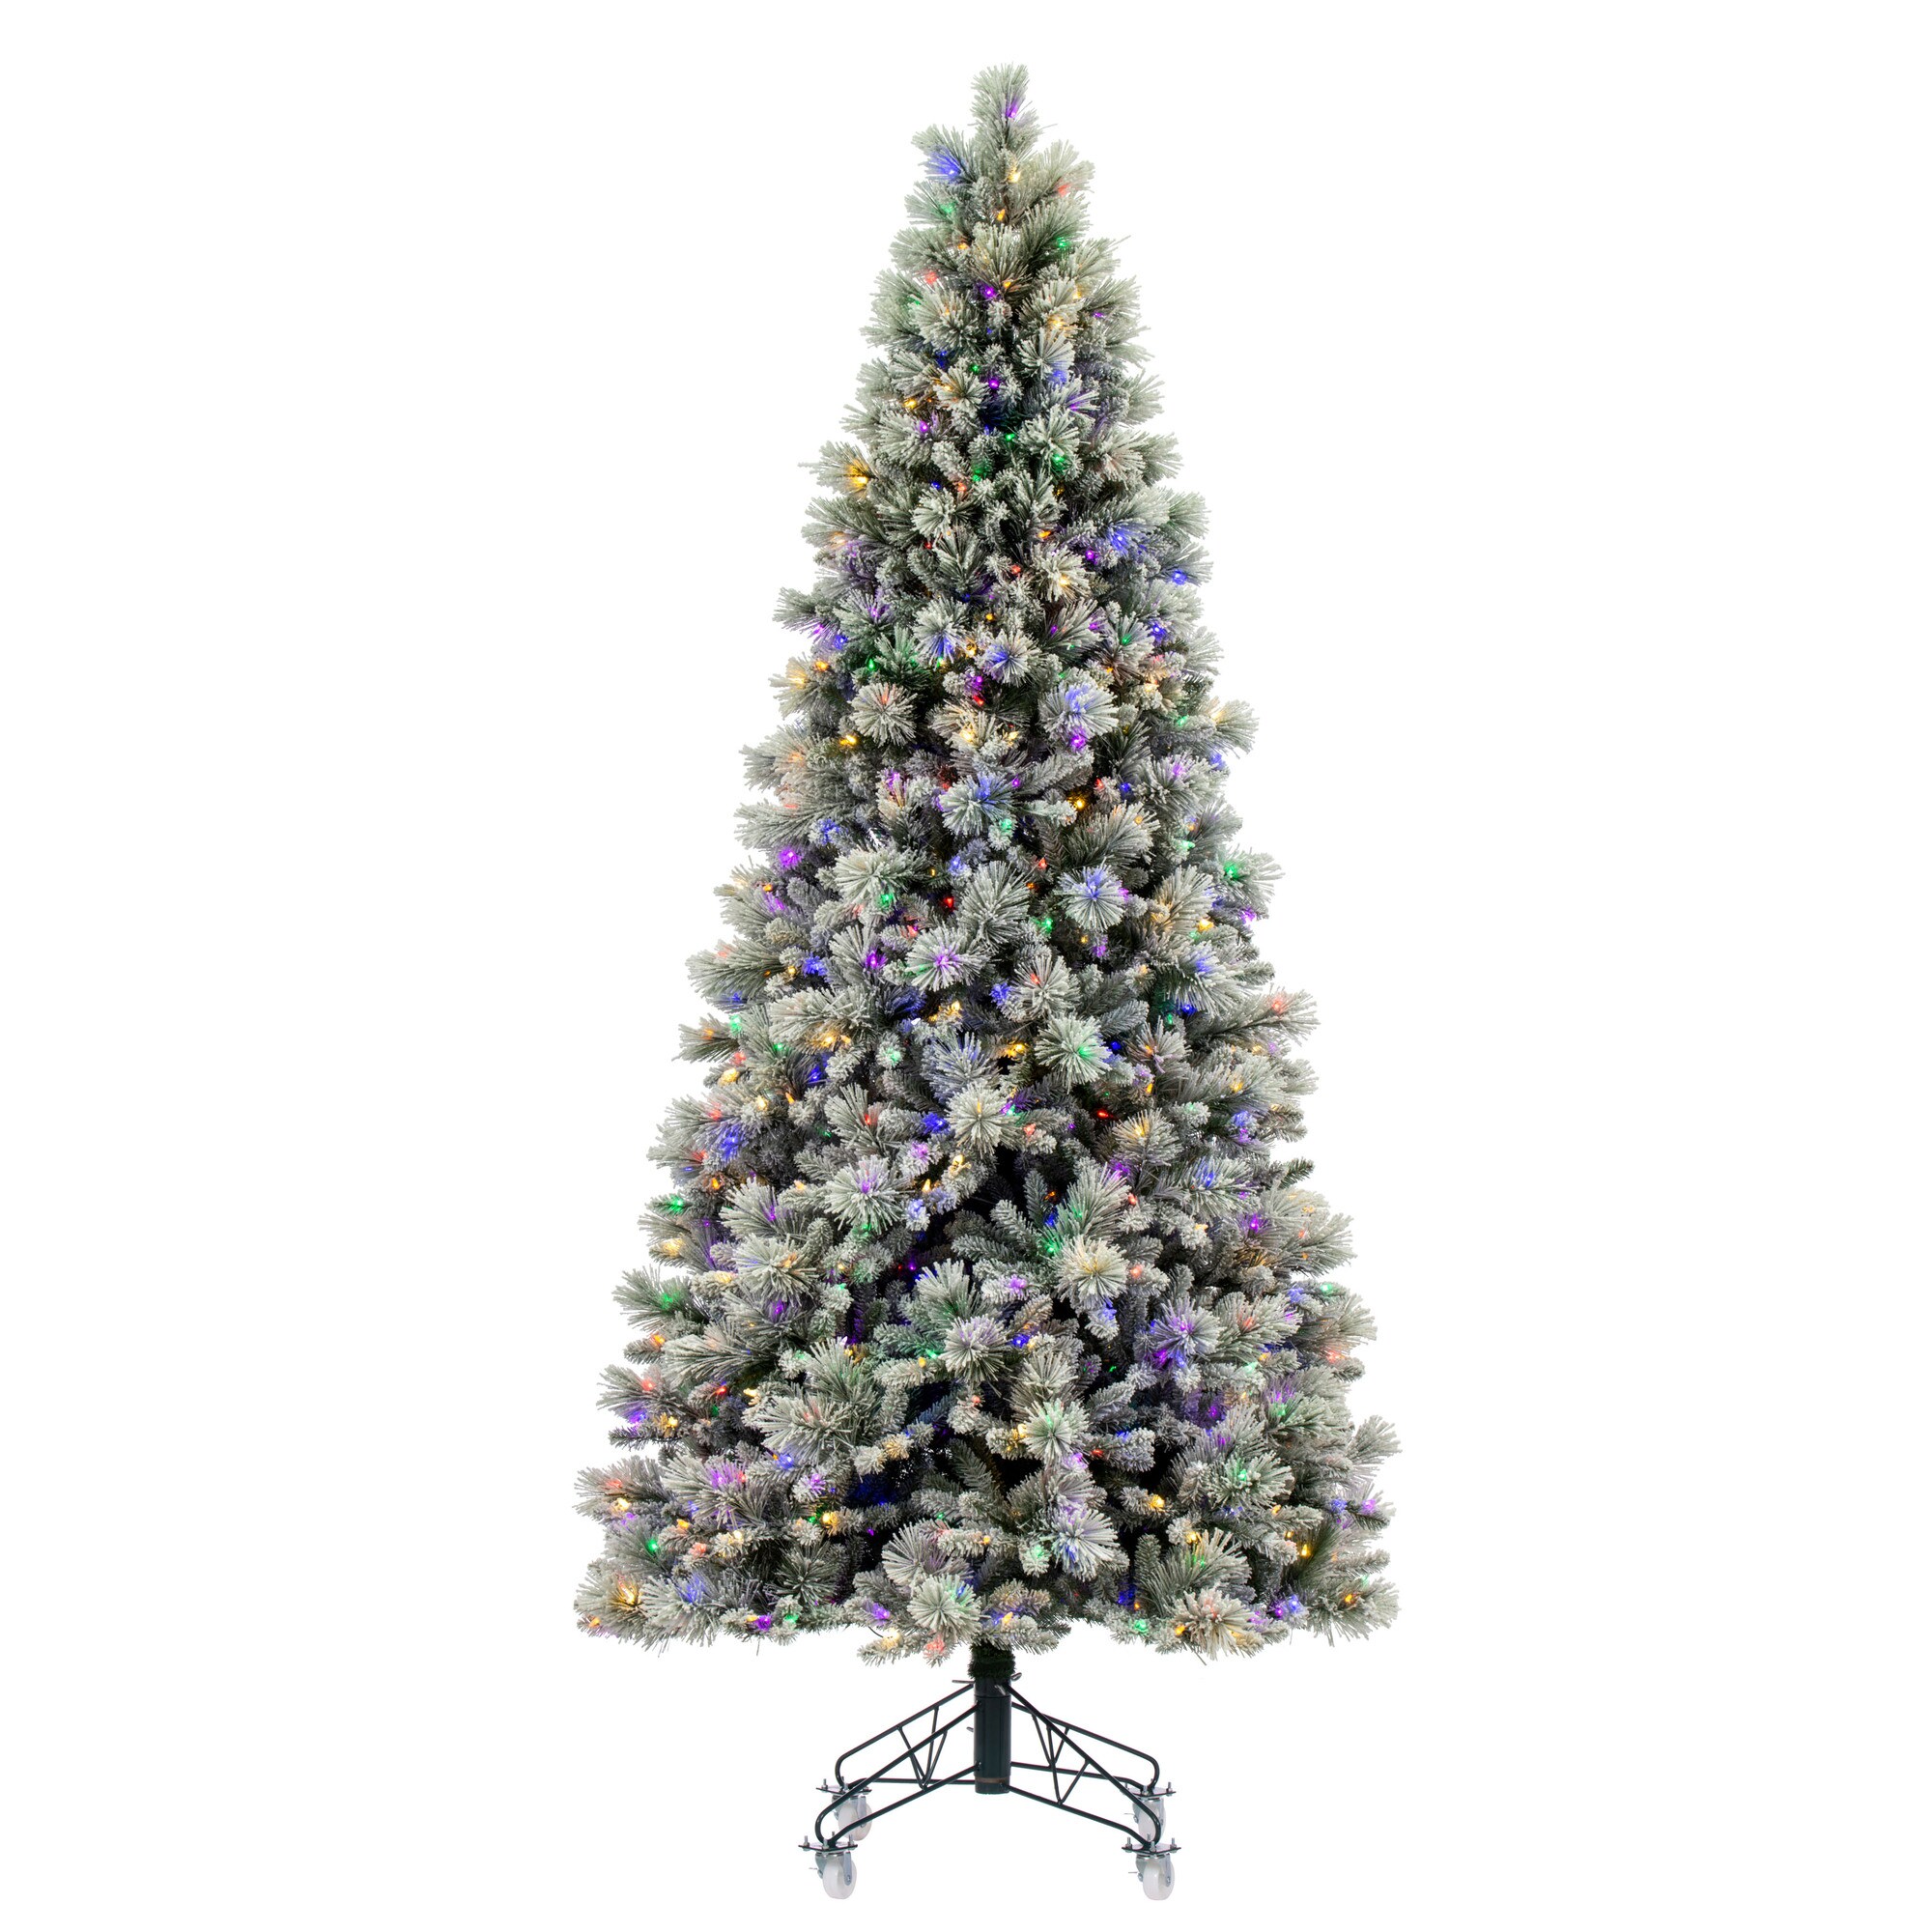 Snow Flocked Christmas Tree, 7ft Artificial Christmas Tree with Lush 1100 Branch Tips, Premium Hinged Full PVC Snow Flocked Xmas Tree for Outdoor